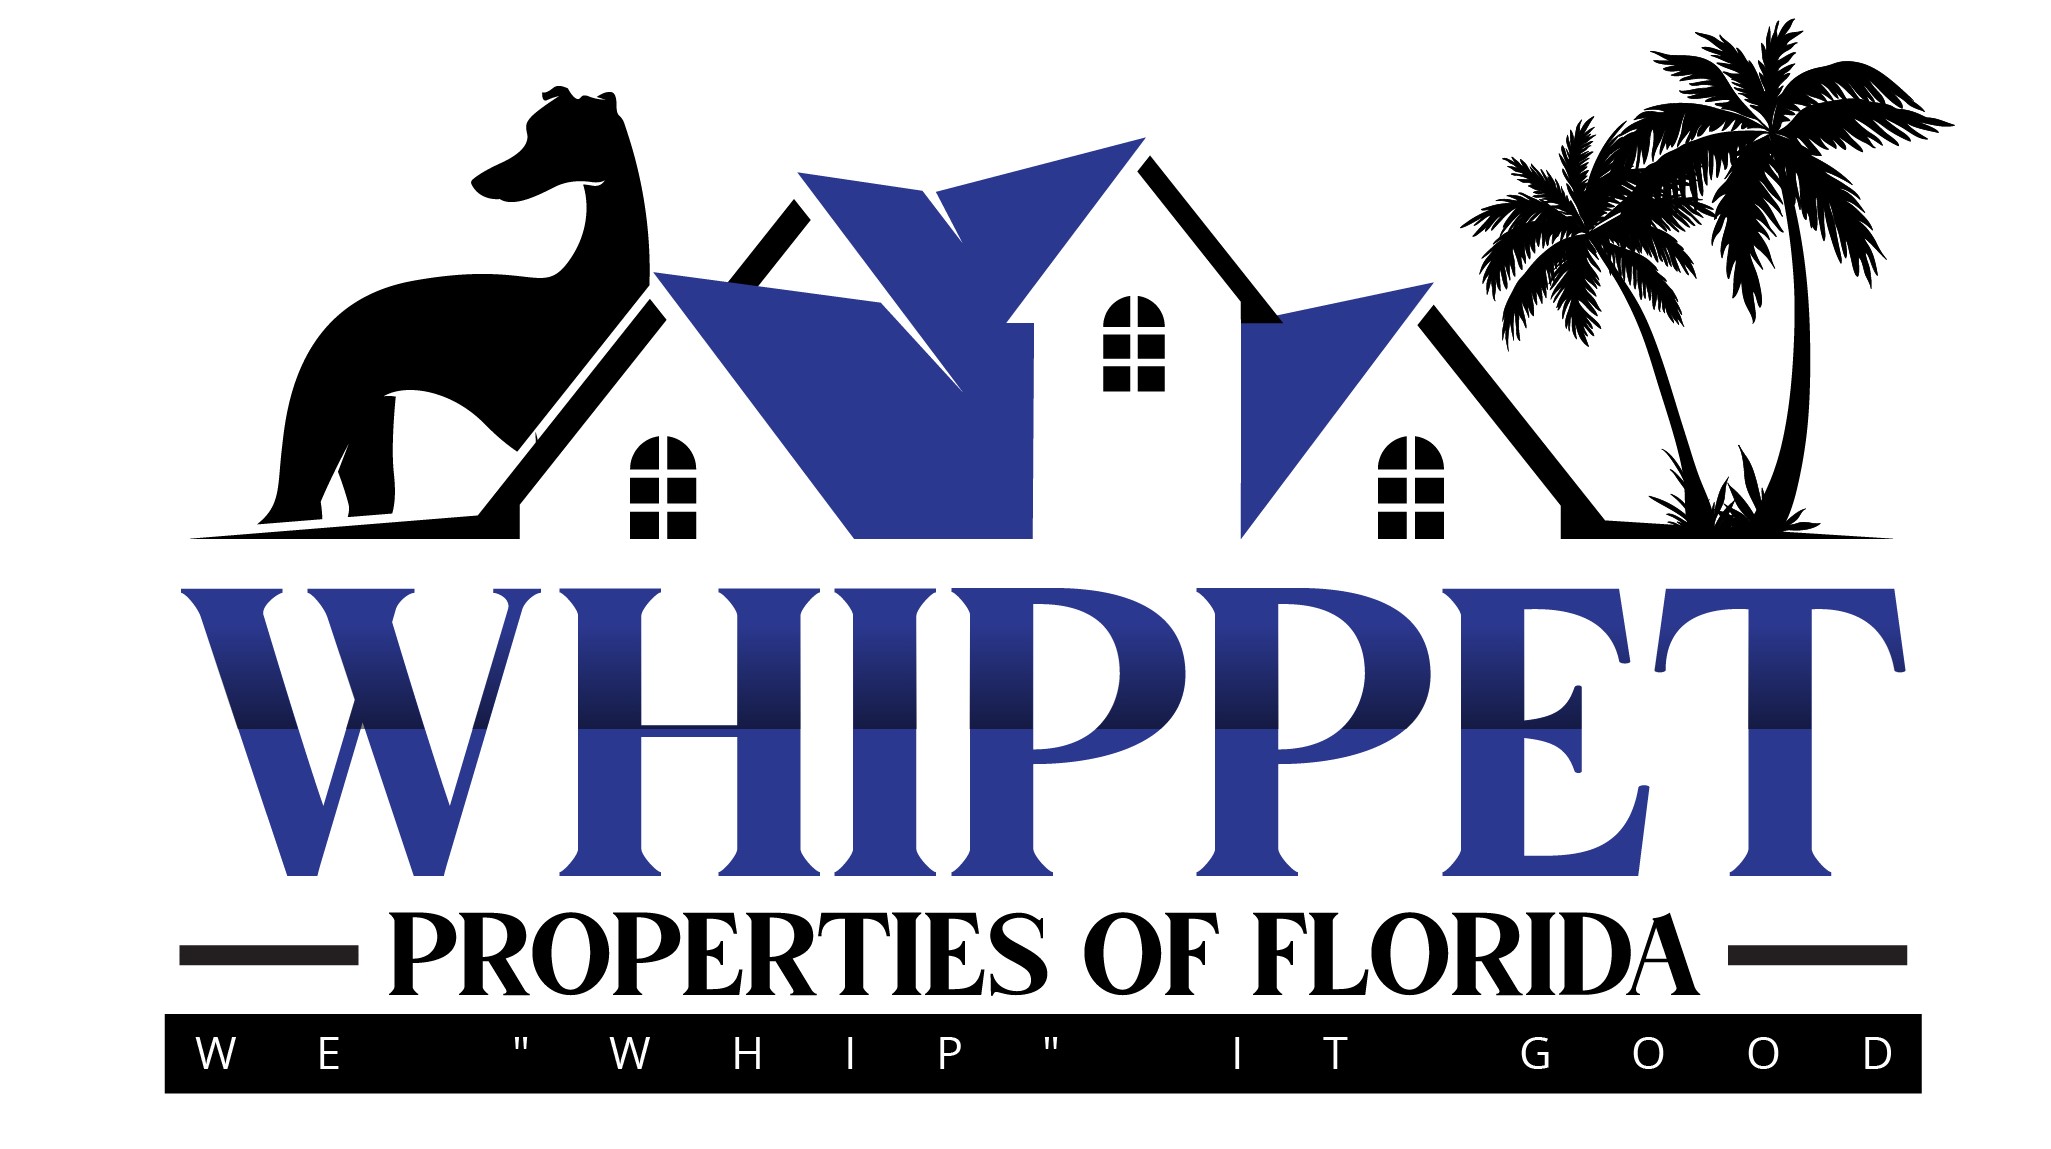 Get results in/> Tampa with
Whippet Properties of Florida as your real estate agent -
8132658122